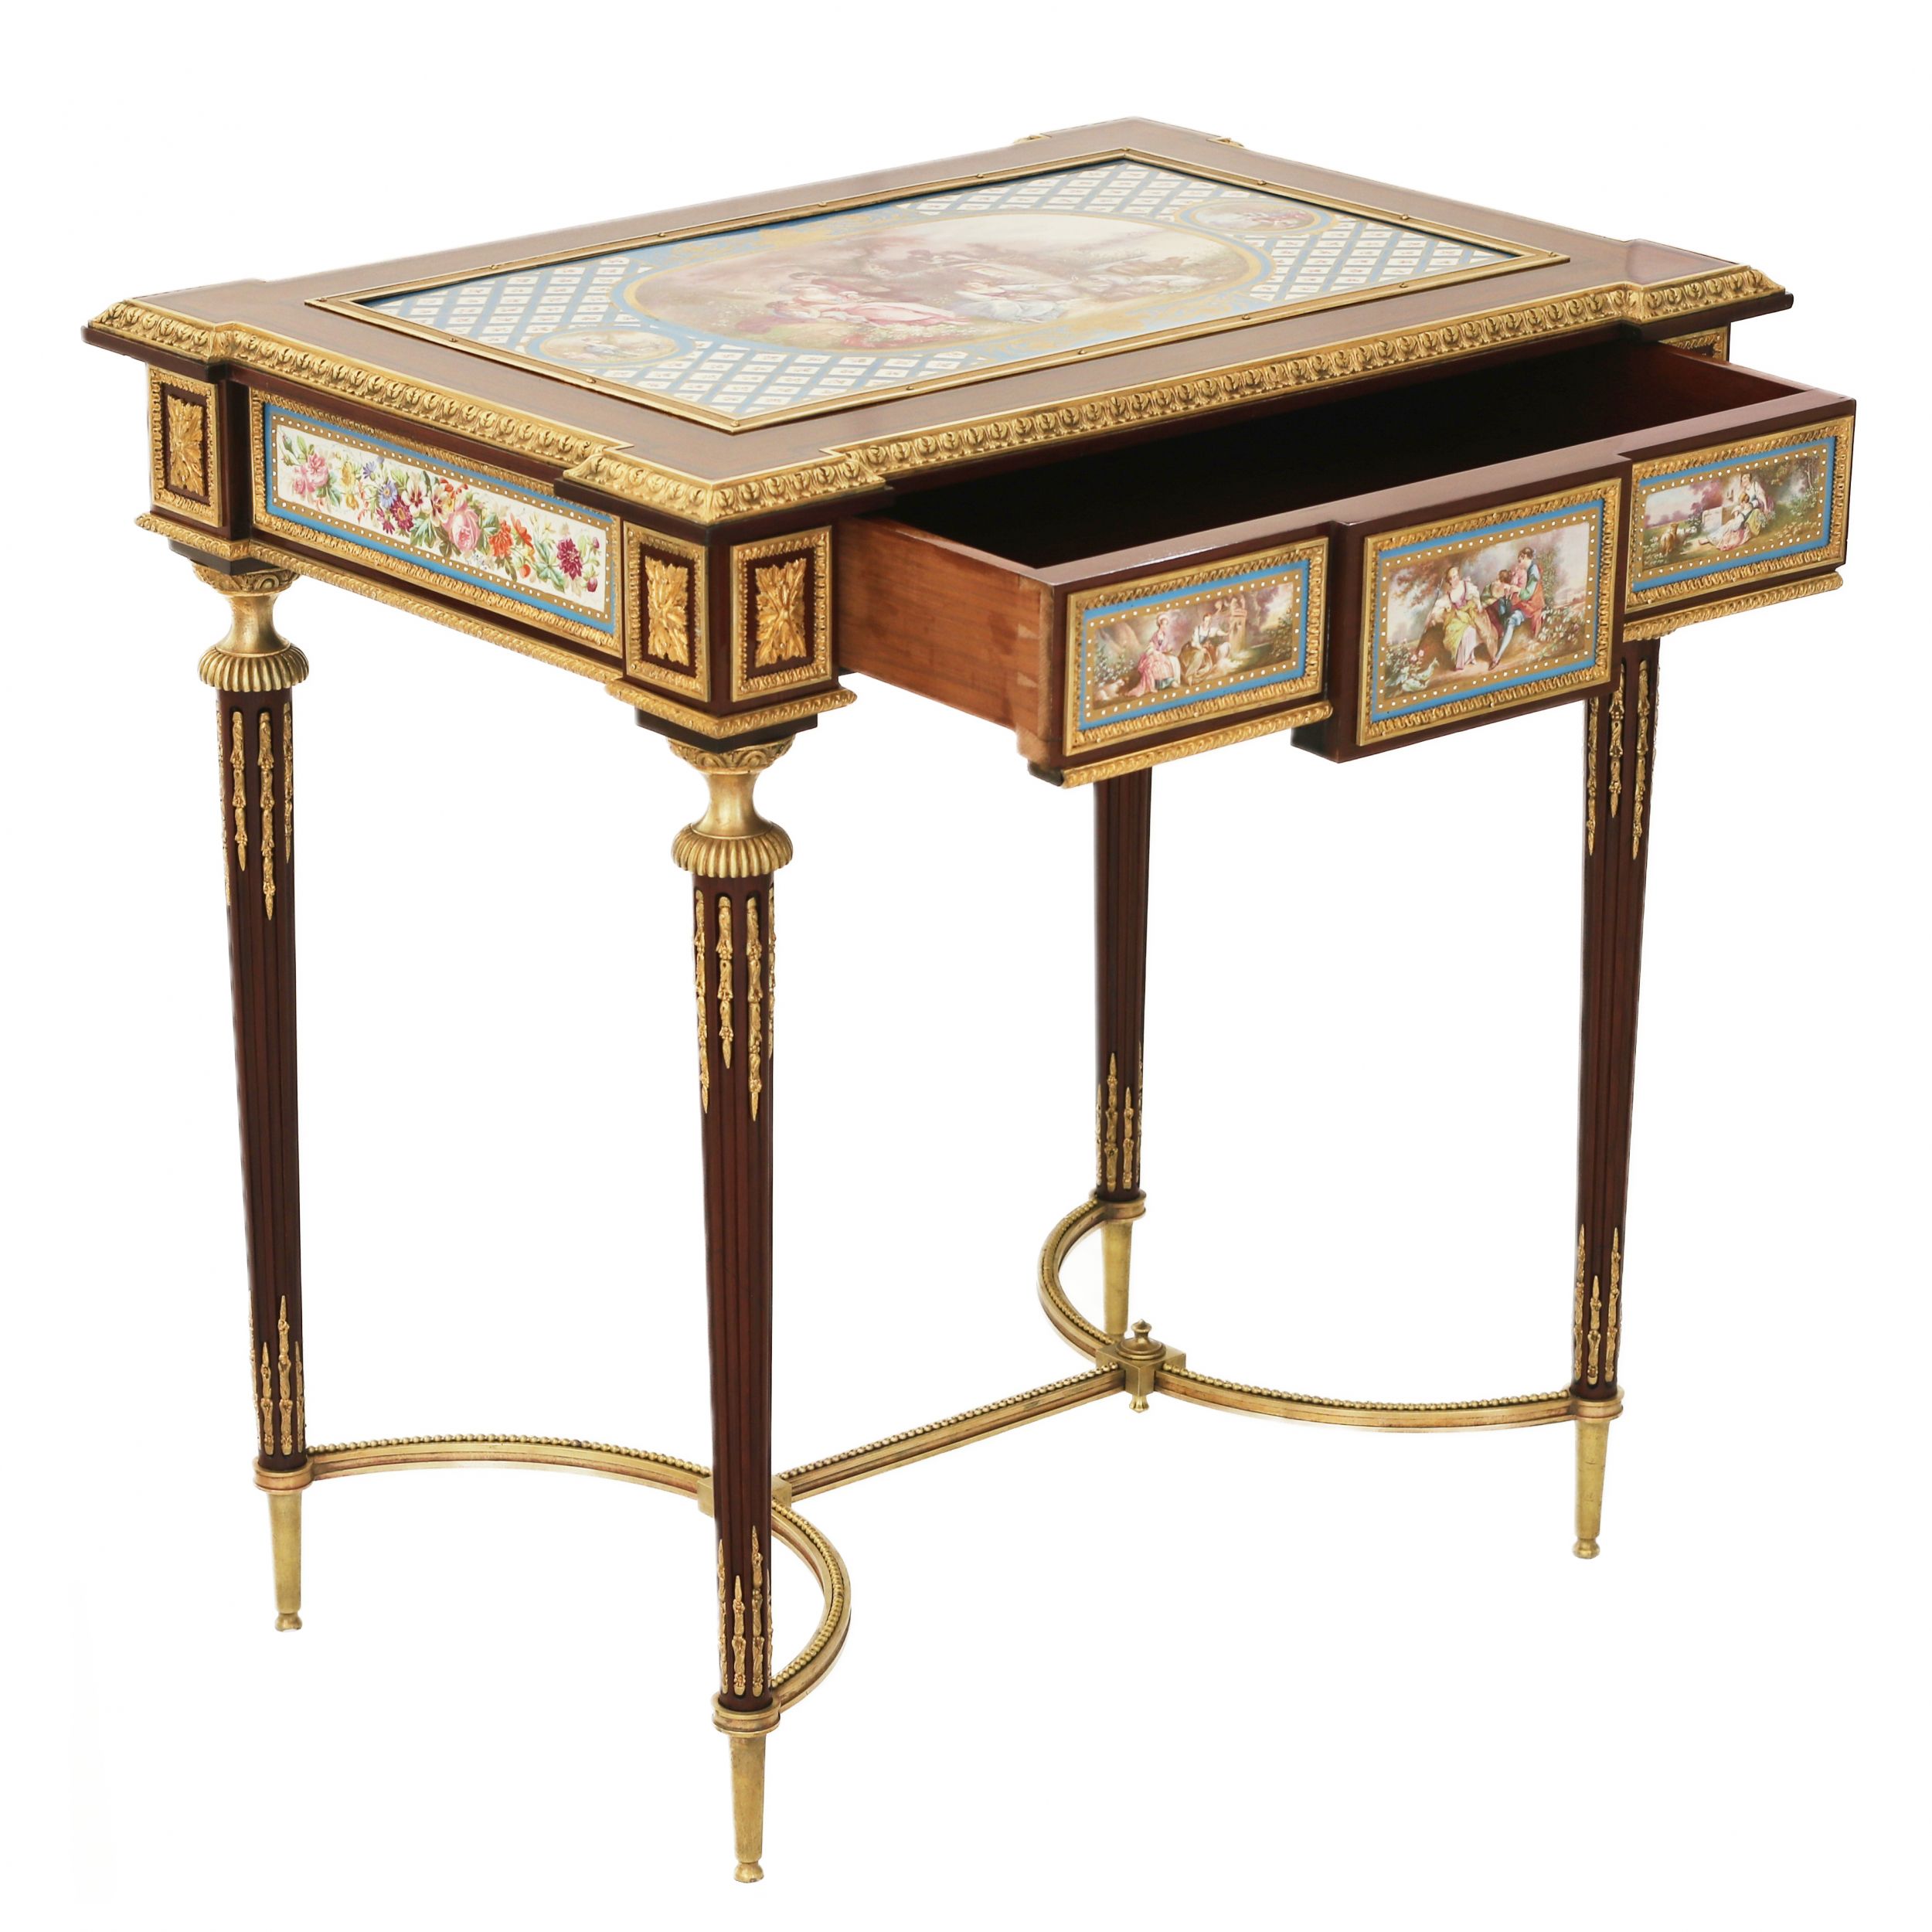 A magnificent ladies table with gilded bronze decor and porcelain panels in the style of Adam Weiswe - Image 3 of 12